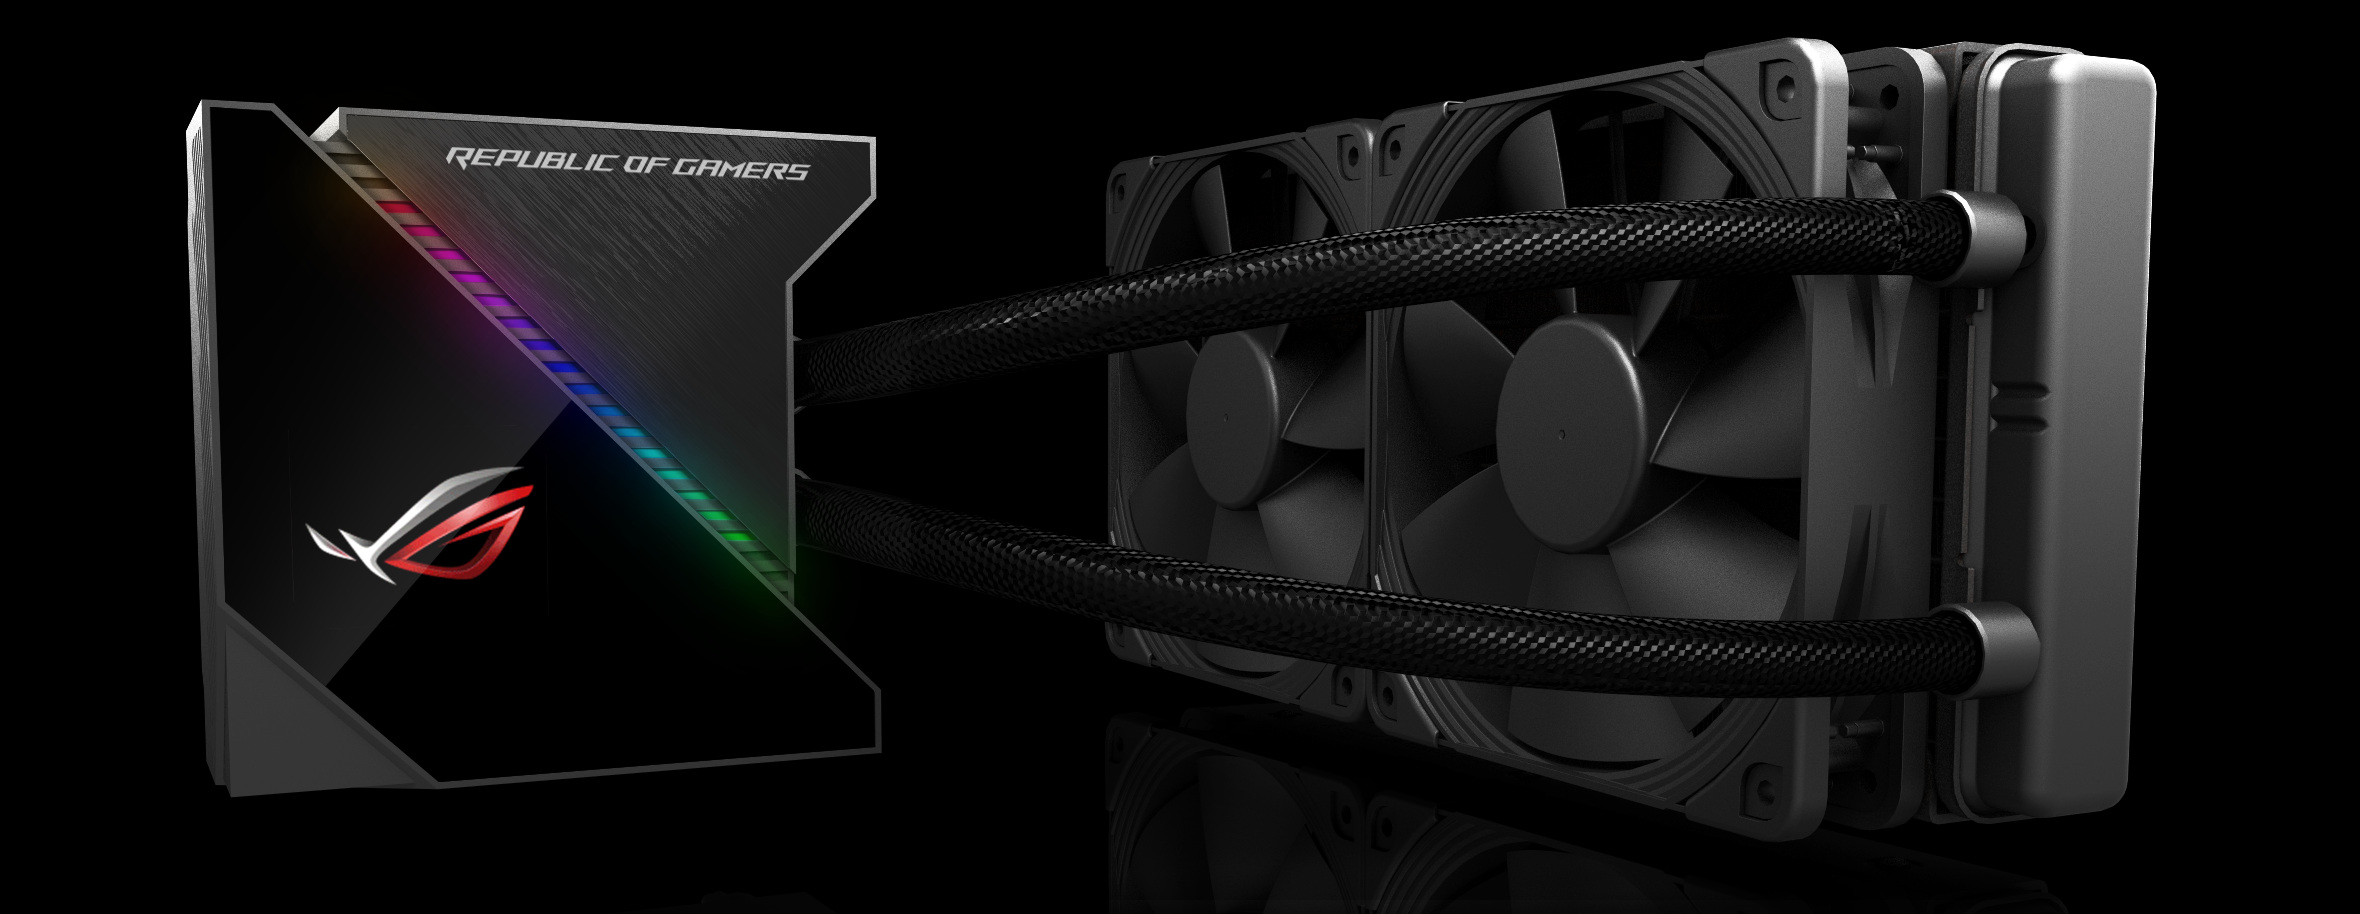 Choosing the right AIO cooler for your build: your guide to ROG's  all-in-one cooler family | ROG - Republic of Gamers Global